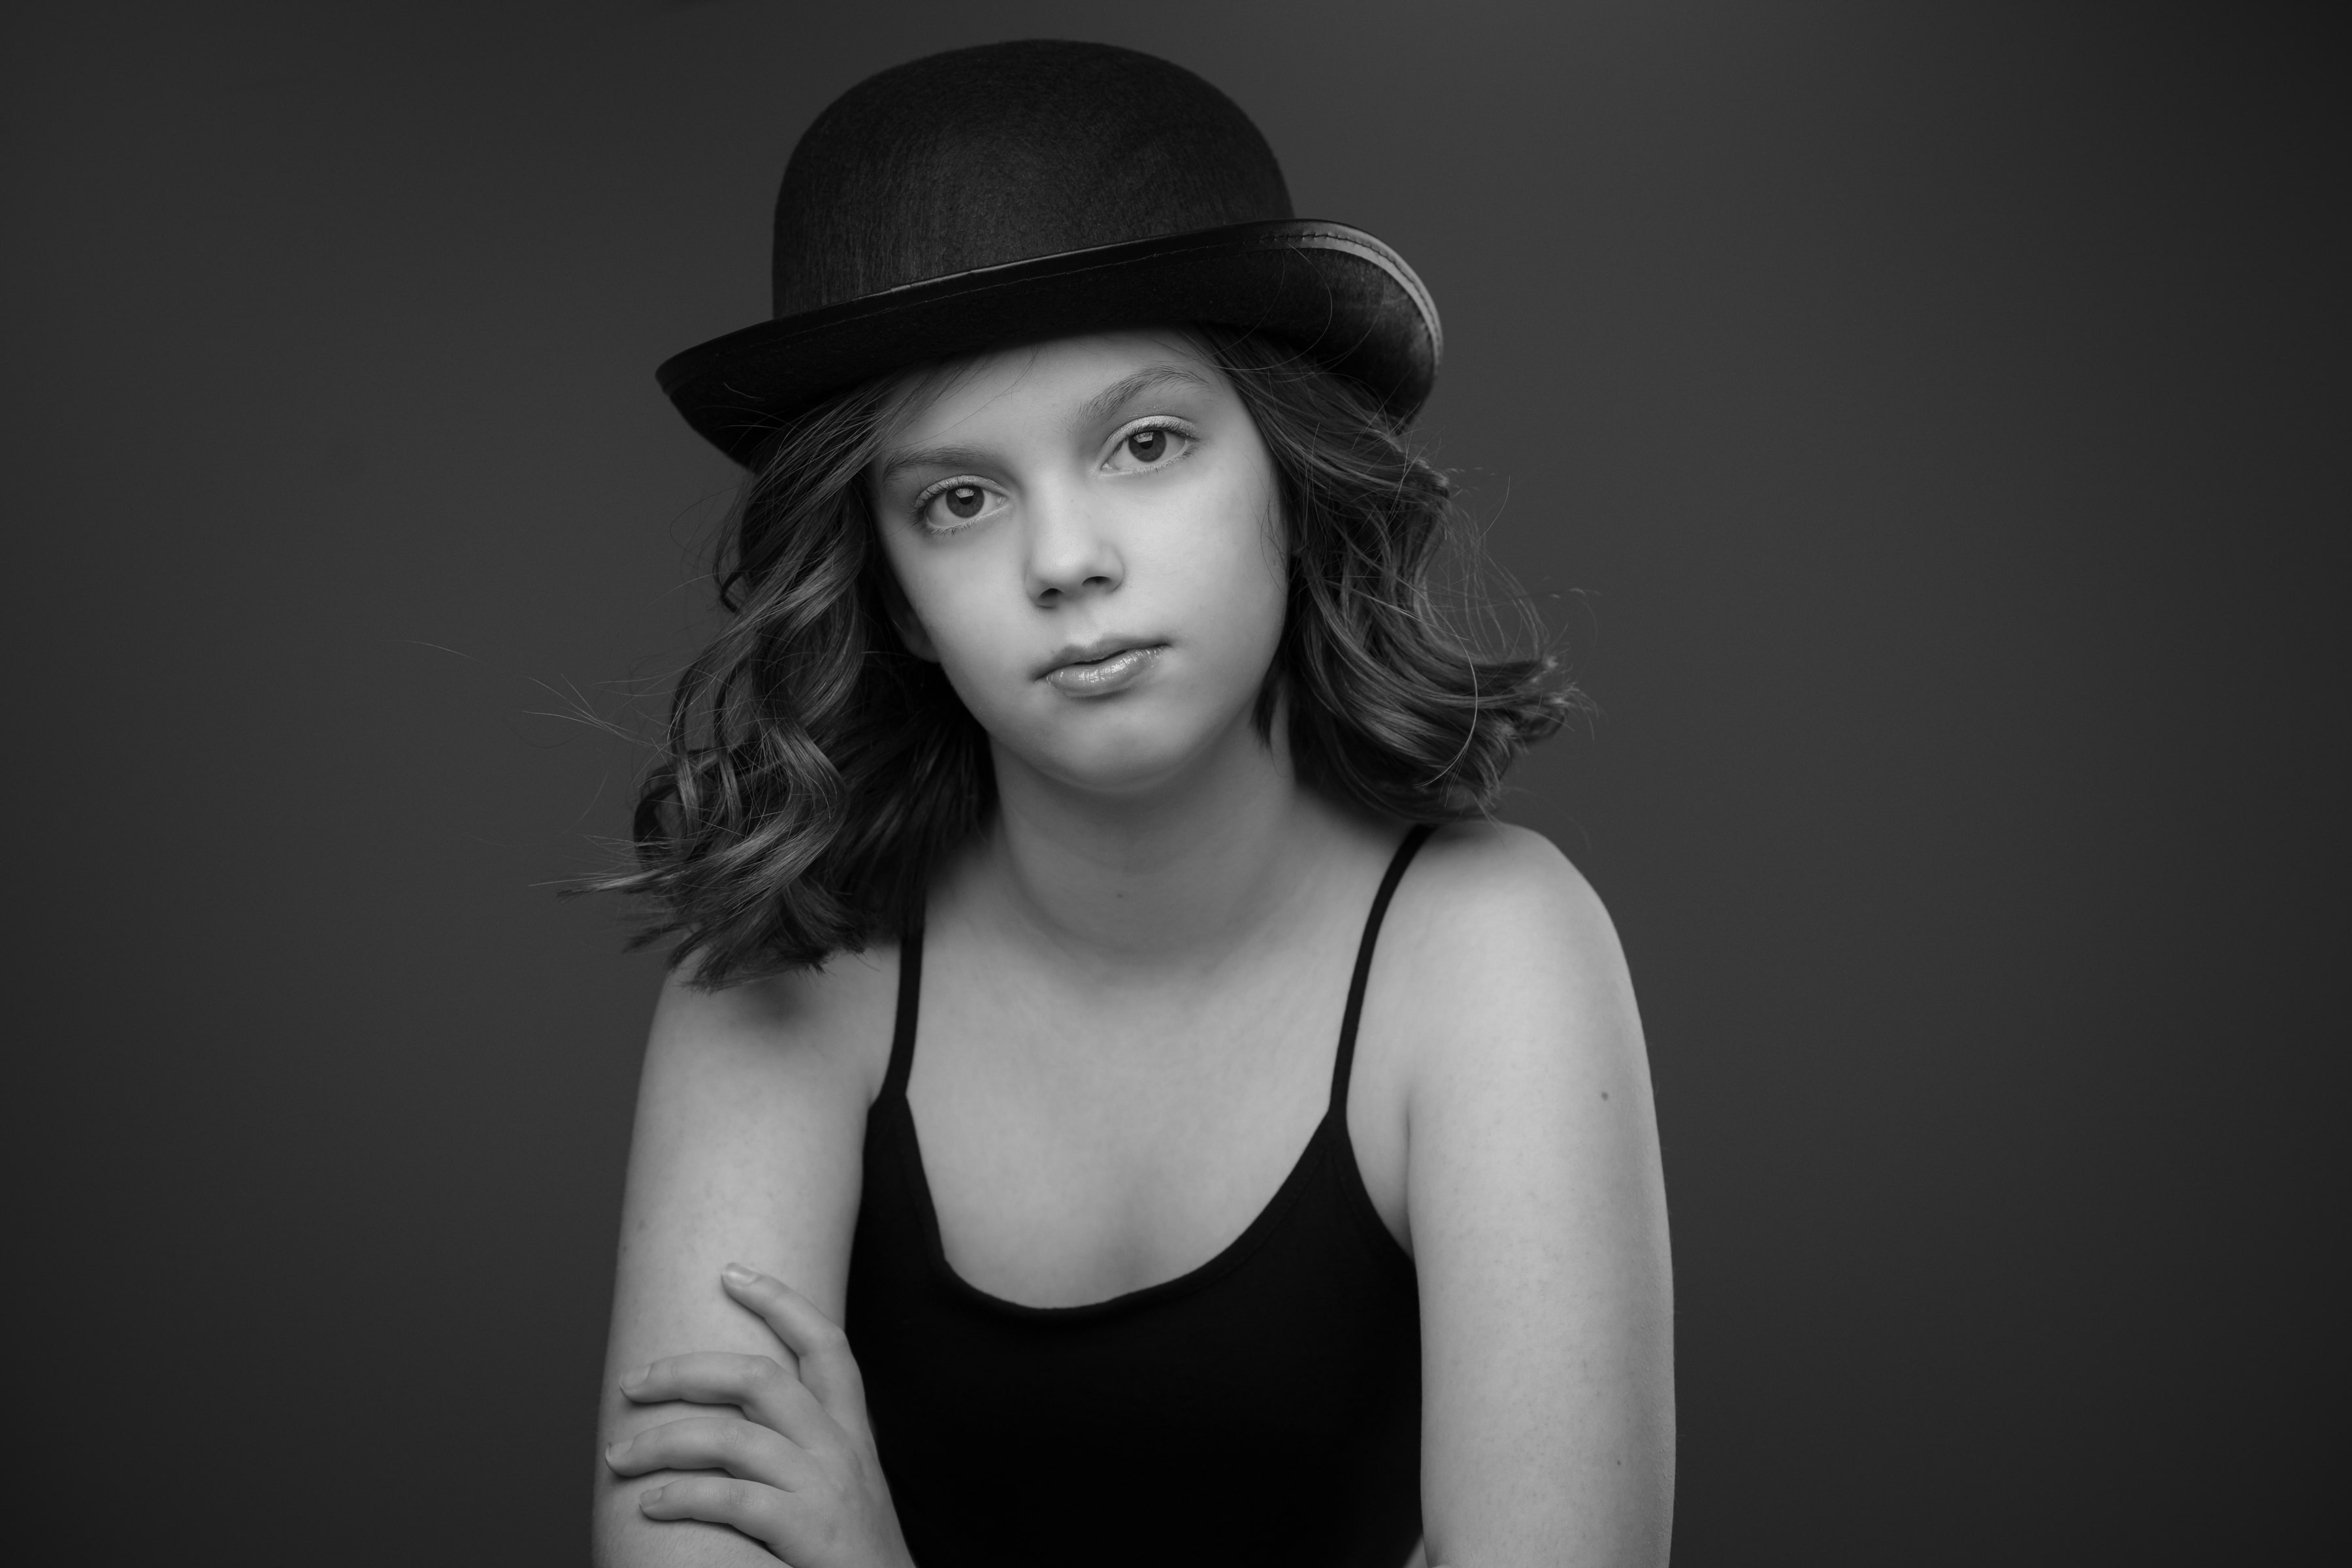 Photo of a girl wearing bowler hat